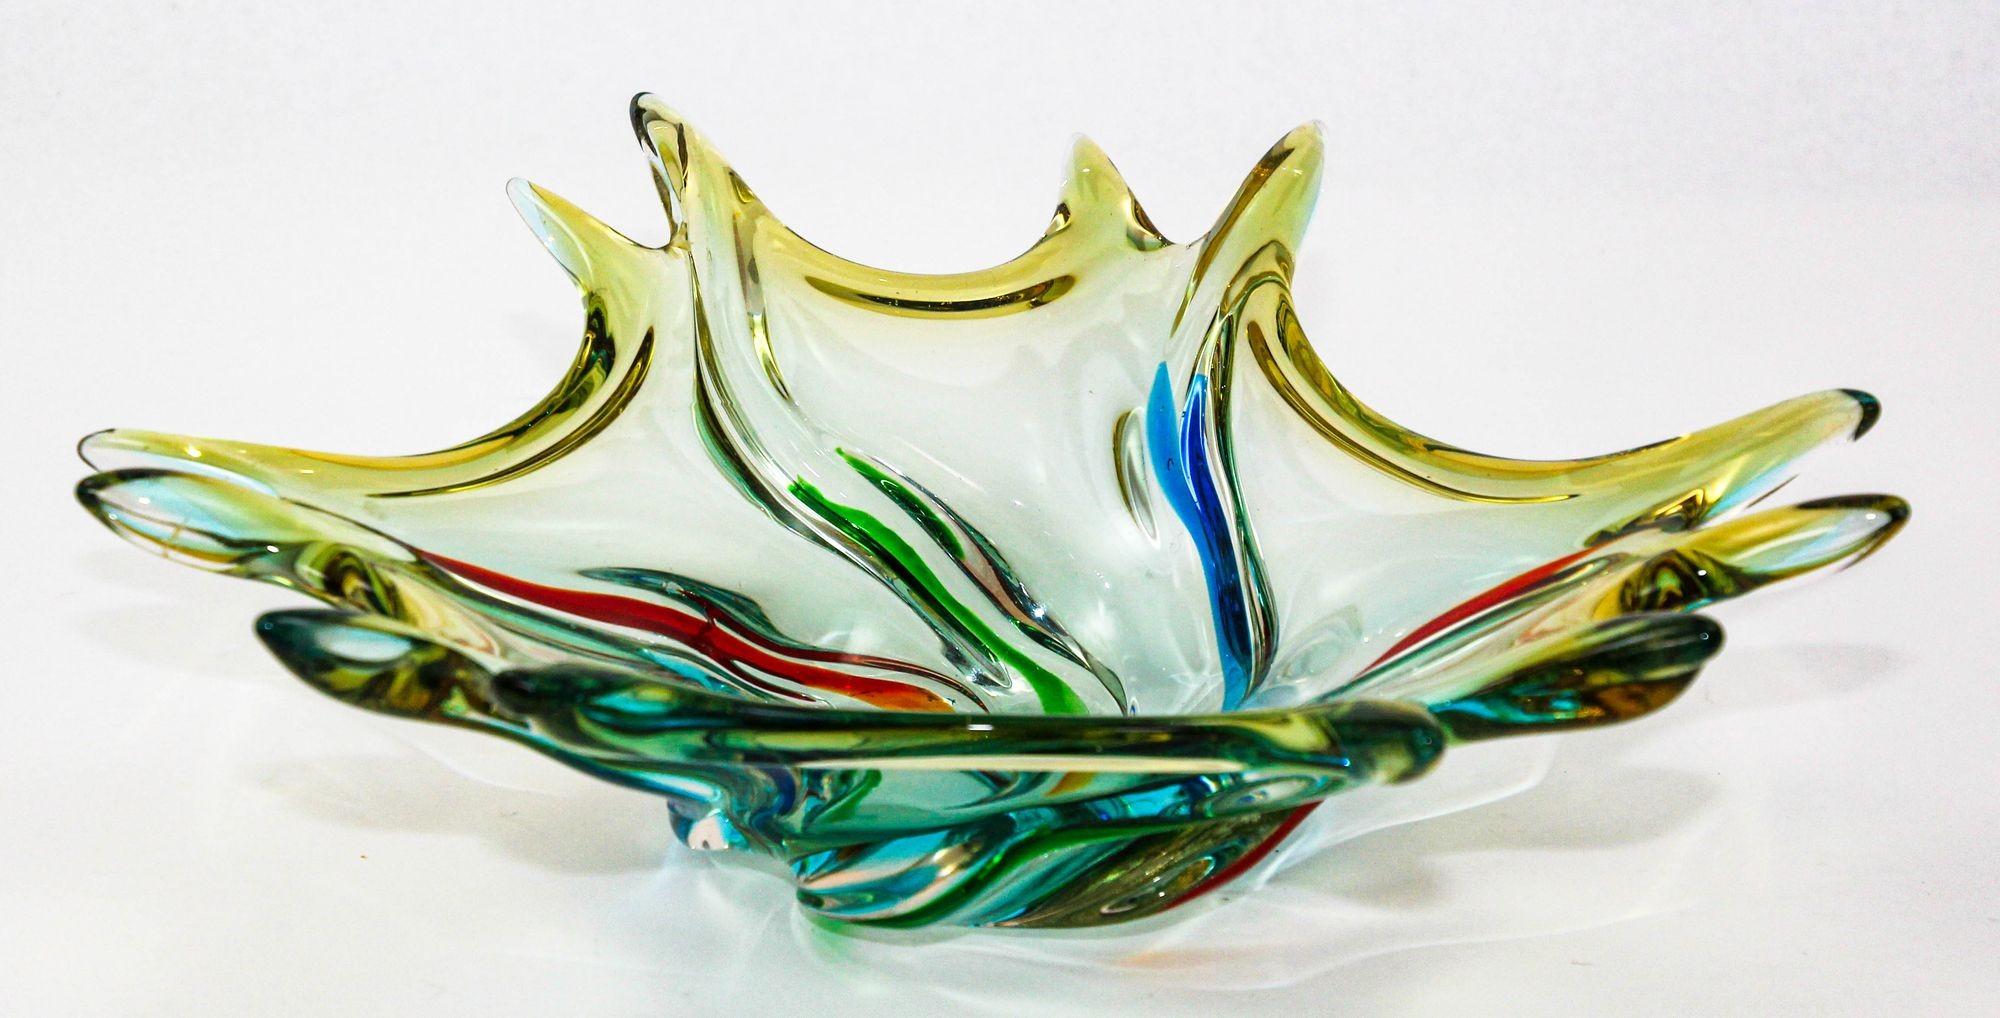 Vintage Italian Murano Art Glass Fruit Bowl Sculptural Centerpiece 1960s In Good Condition For Sale In North Hollywood, CA